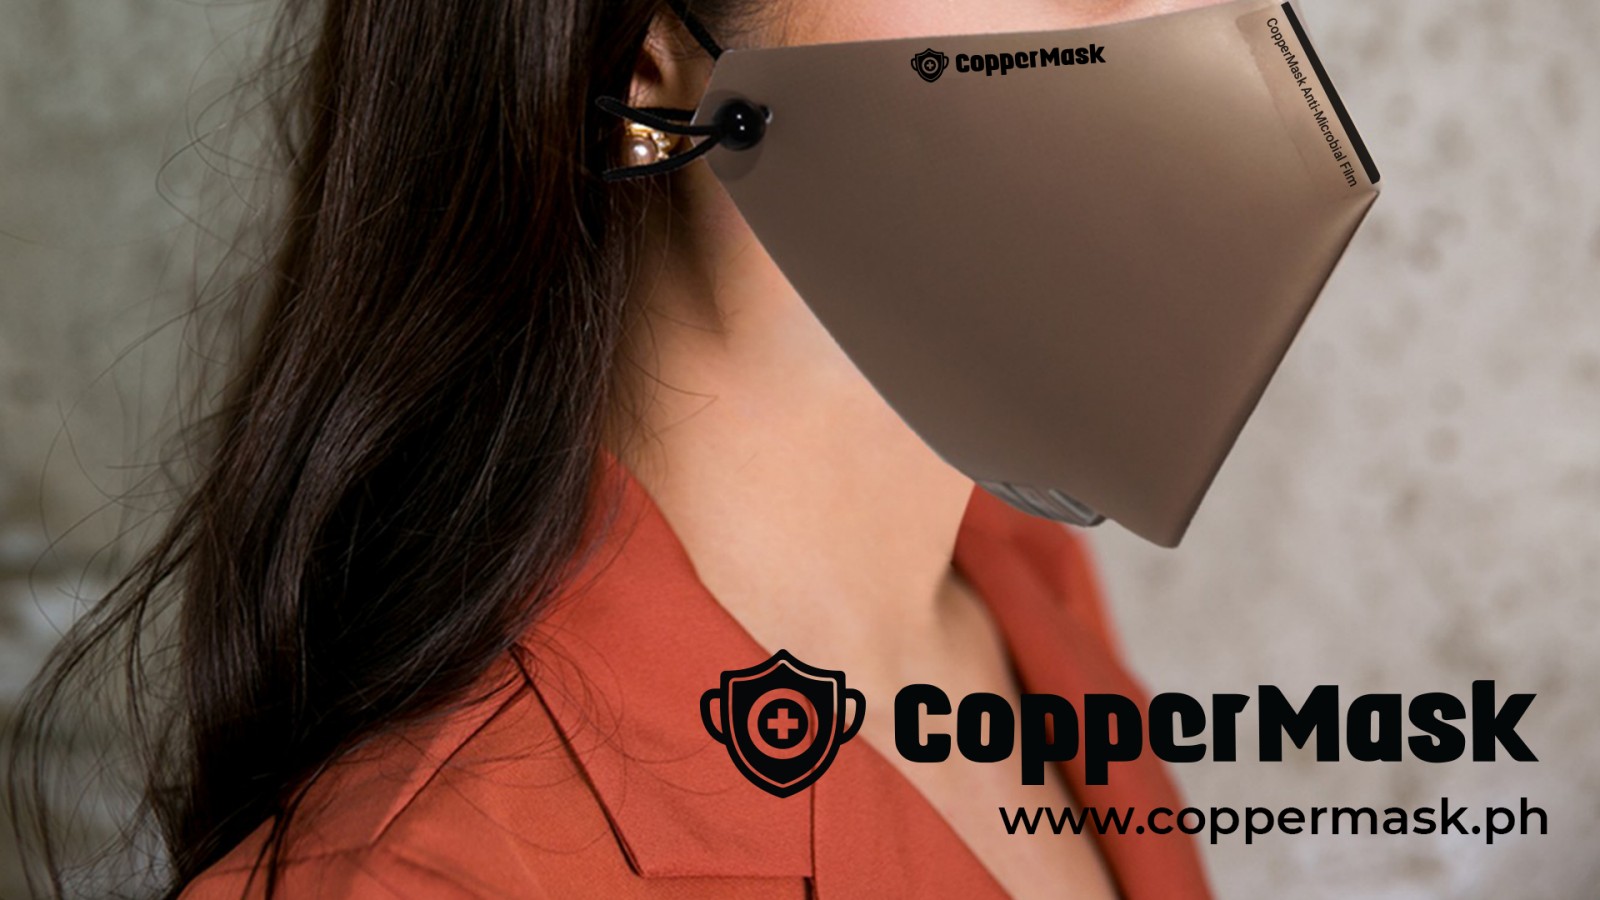 CopperMask, the first and 100% original CopperMask in the Philippines is a stylish facemask that has an antimicrobial film